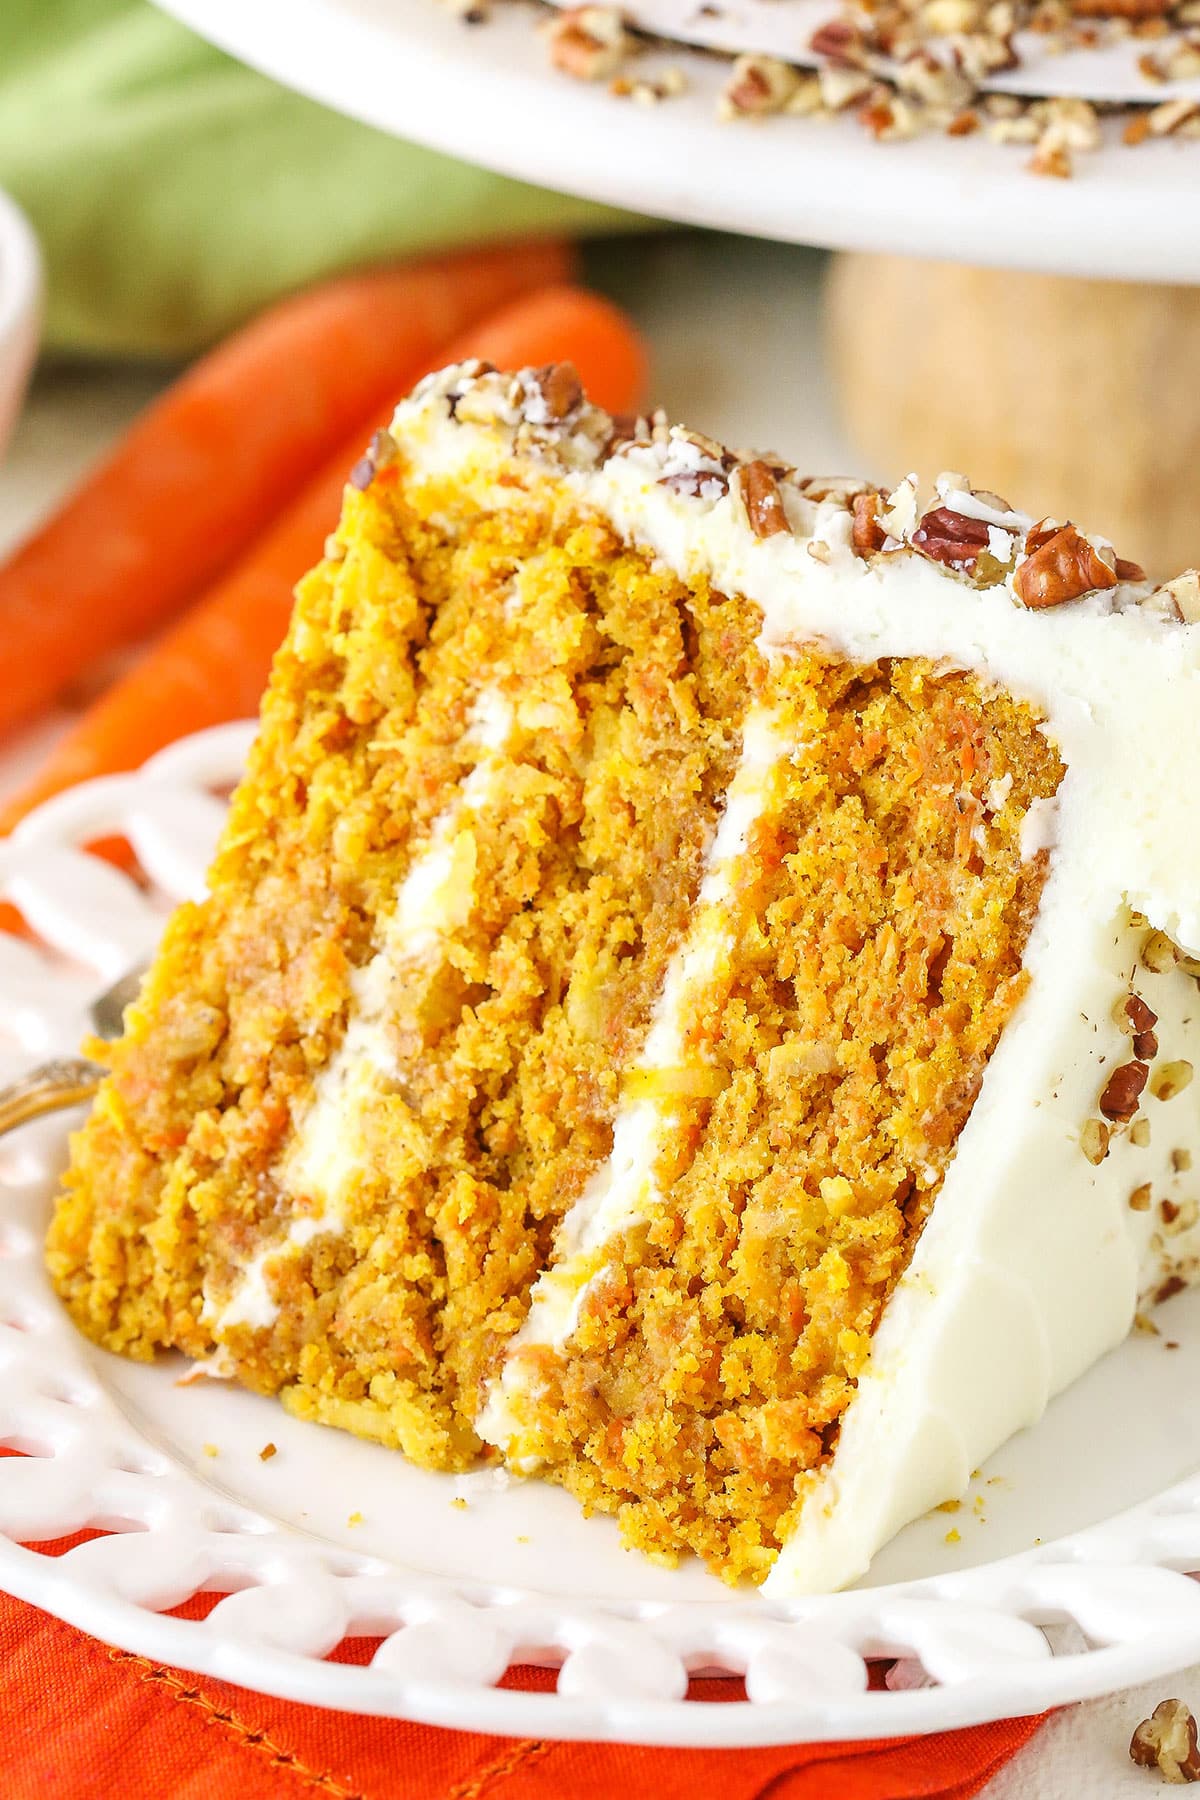 A slice of Carrot Cake on it's side next to a silver fork on a white plate